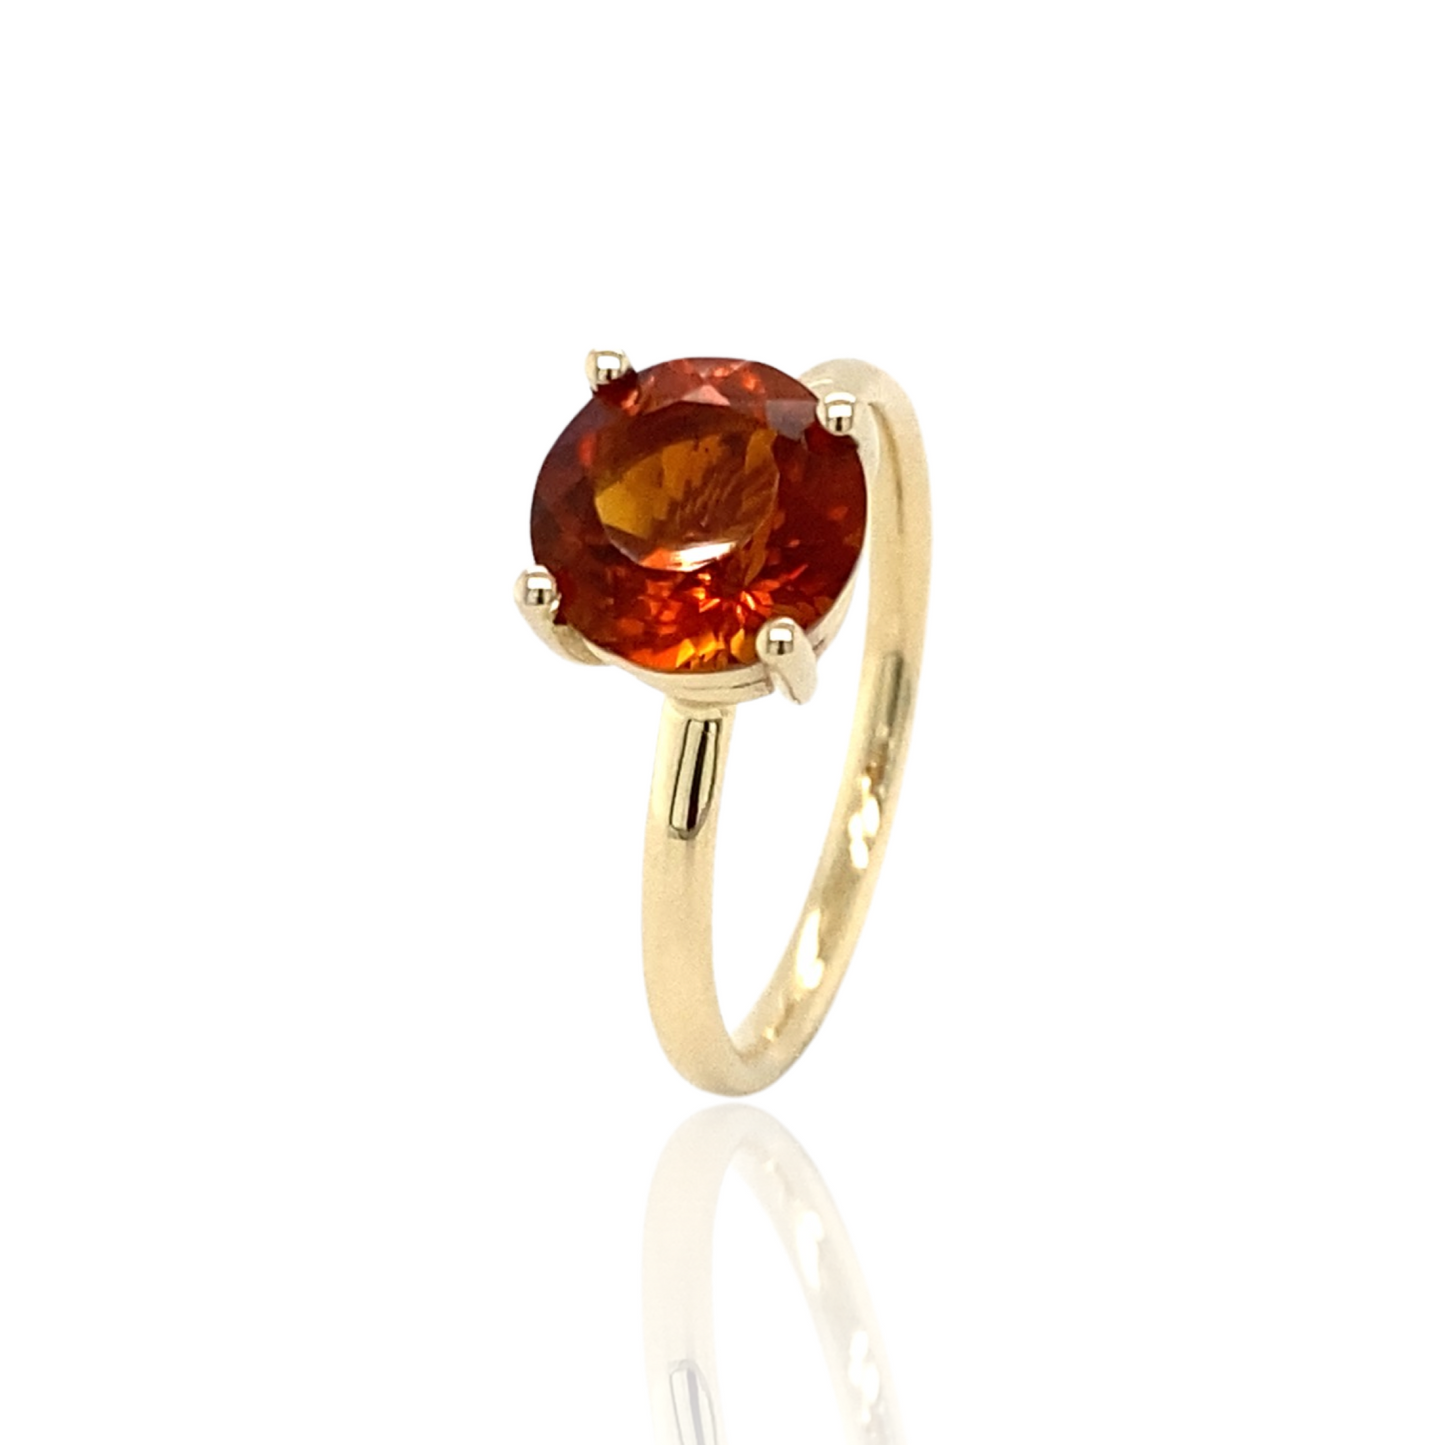 Stackable Madeira Citrine in 14k yellow gold